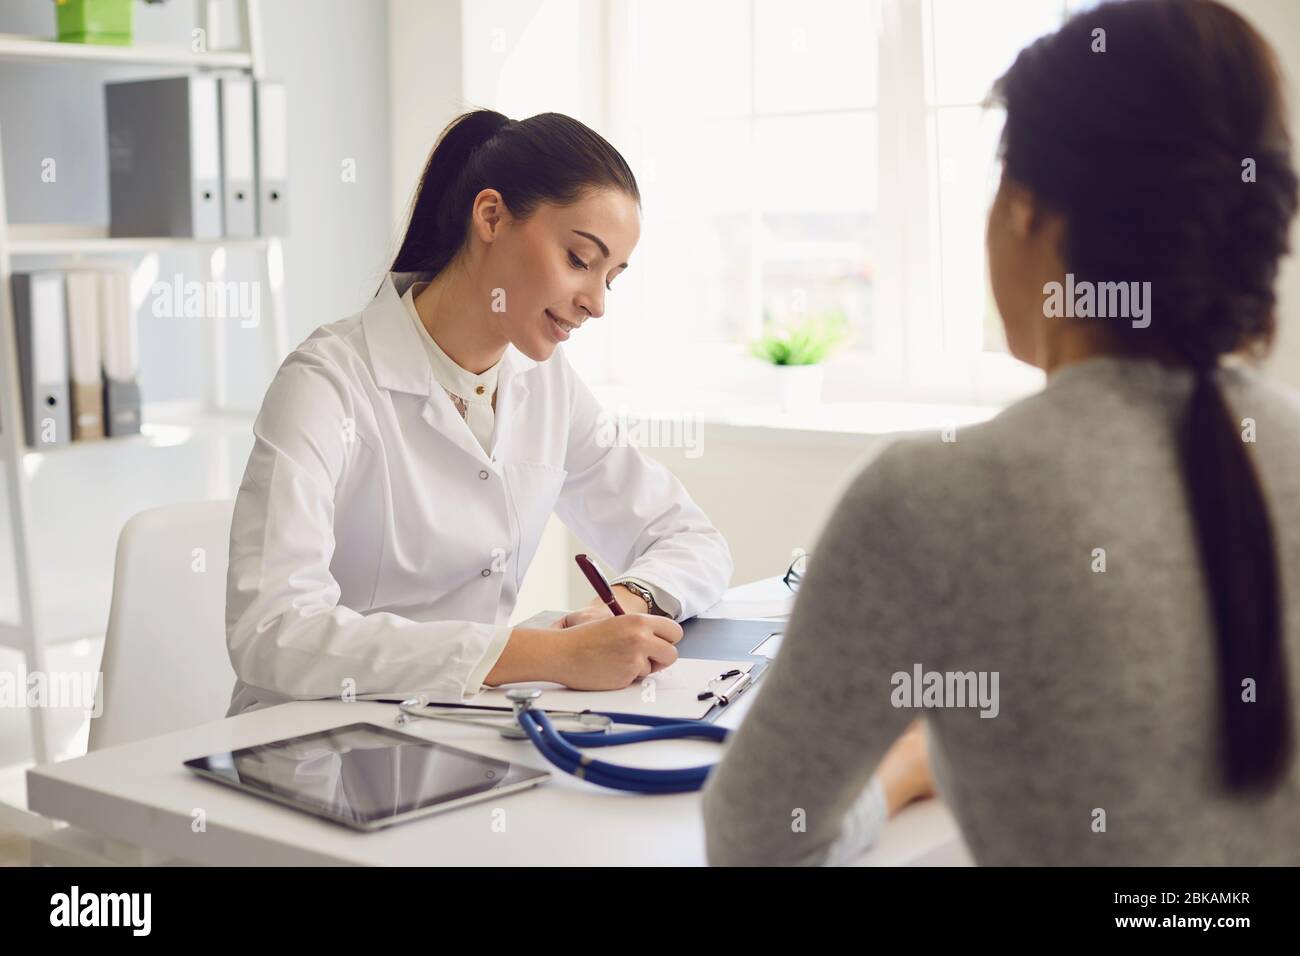 Woman patient visiting female doctor at clinic office. Medical work writes a prescription on a table in a hospital. Stock Photo